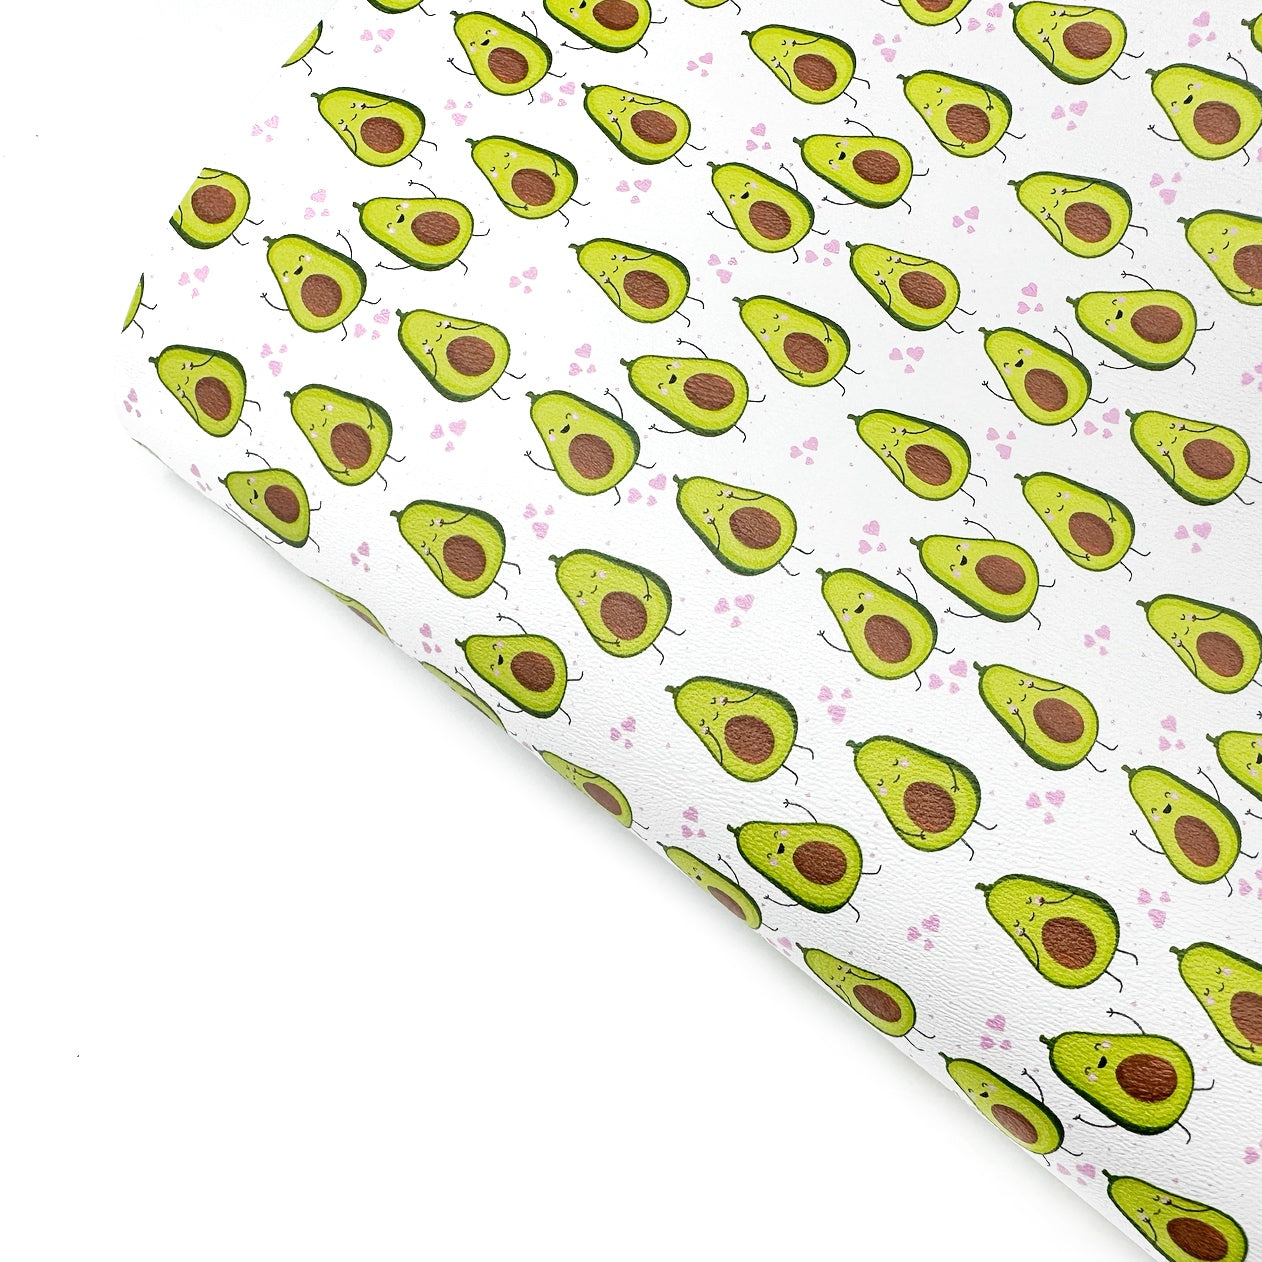 We Love Avocados Premium Faux Leather Fabric Sheets